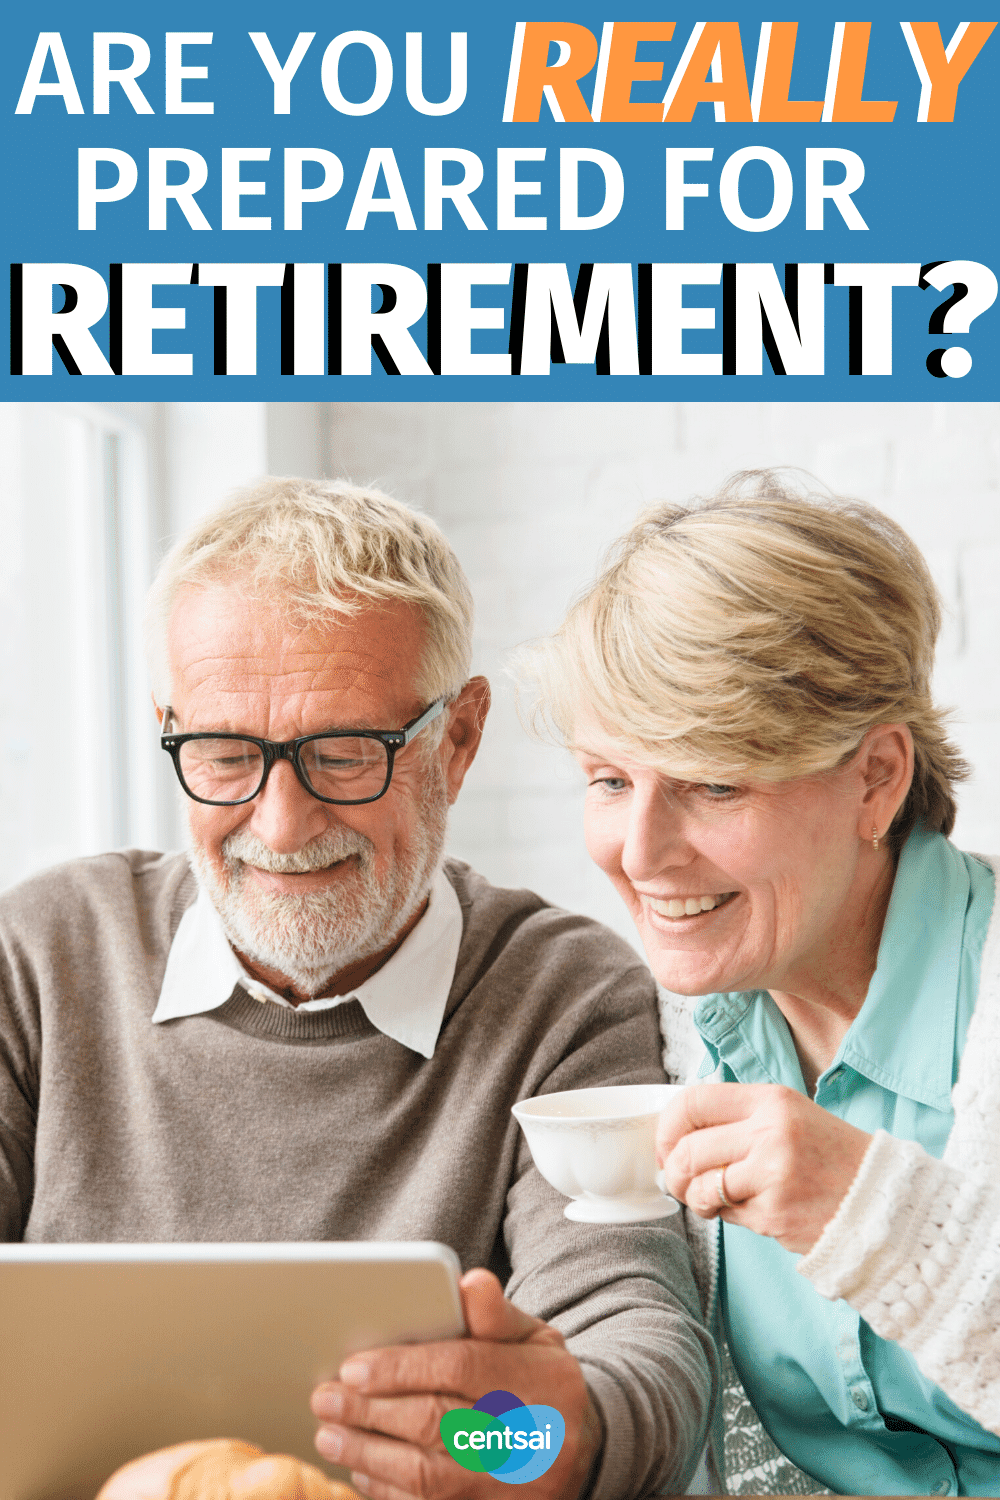 Are You “Really” Prepared for Retirement?